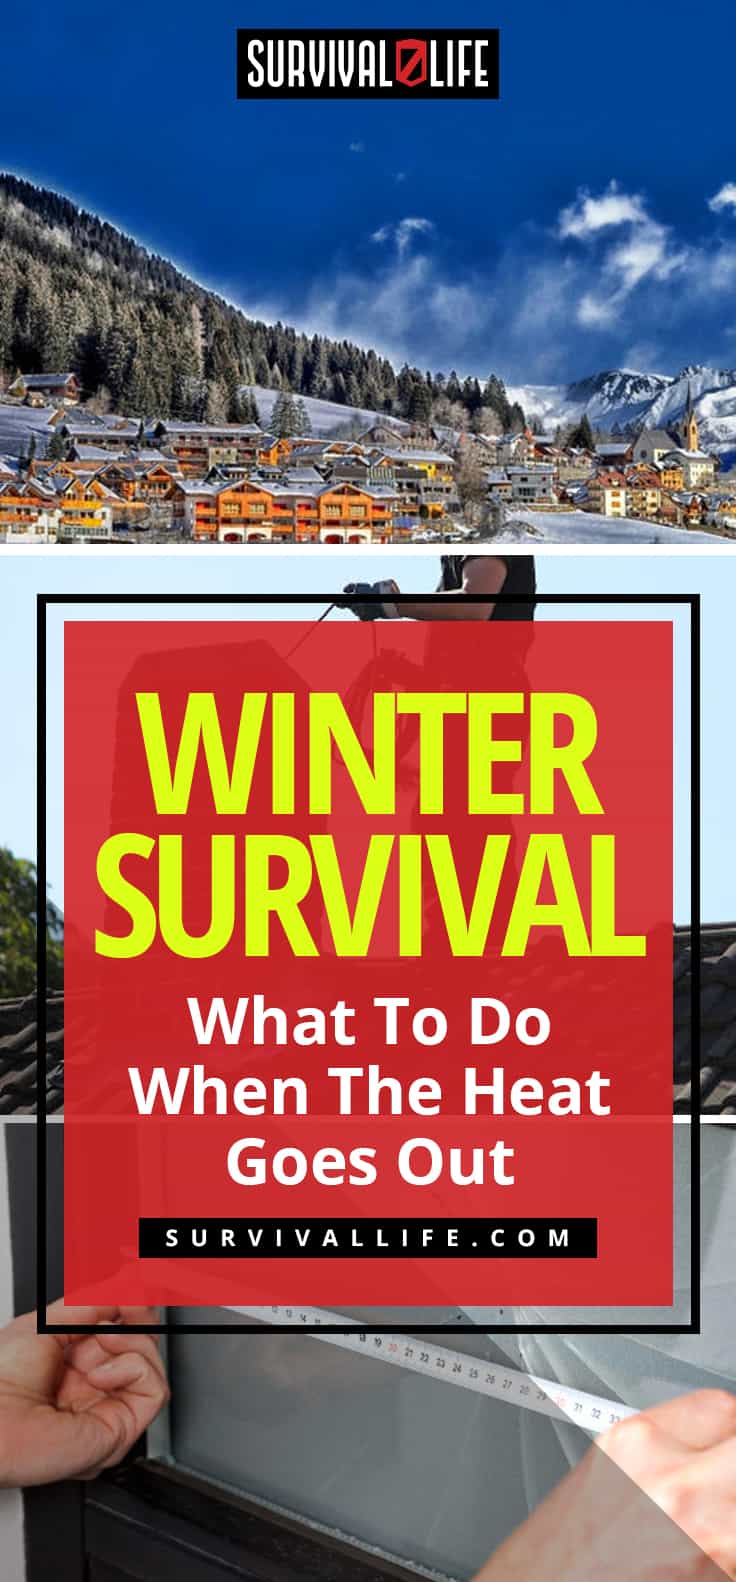 Winter Survival | What To Do When The Heat Goes Out